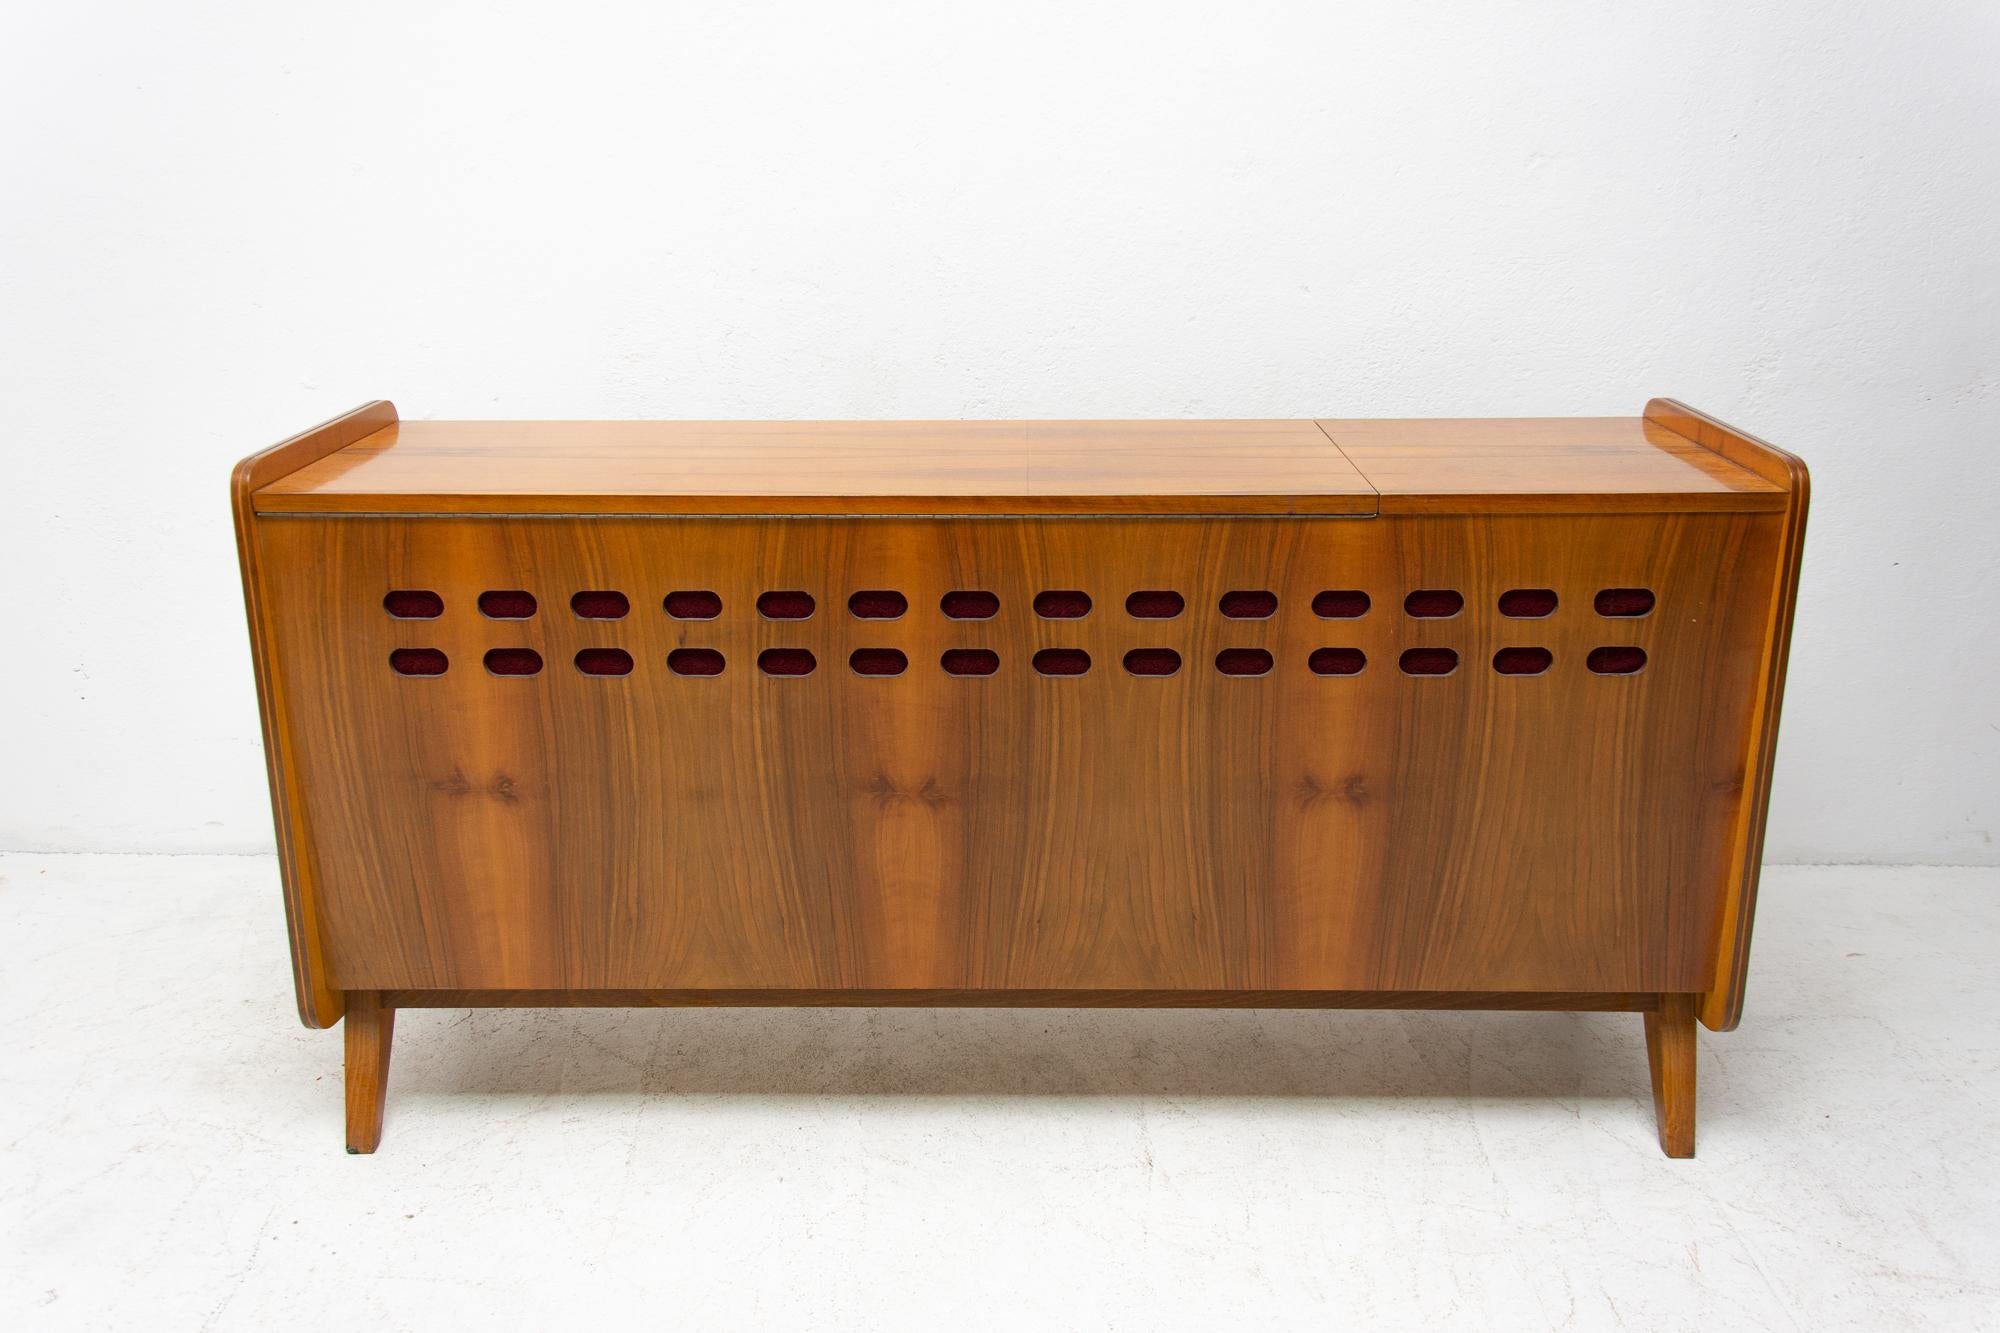 Mid-Century Modern walnut dresser by Frantisek Jirak for Tatra nabytok. Made in the former Czechoslovakia during the 1960s. The dresser is a part of living set. The furniture is primarily intended as a chest of drawers, but it can also be used as a